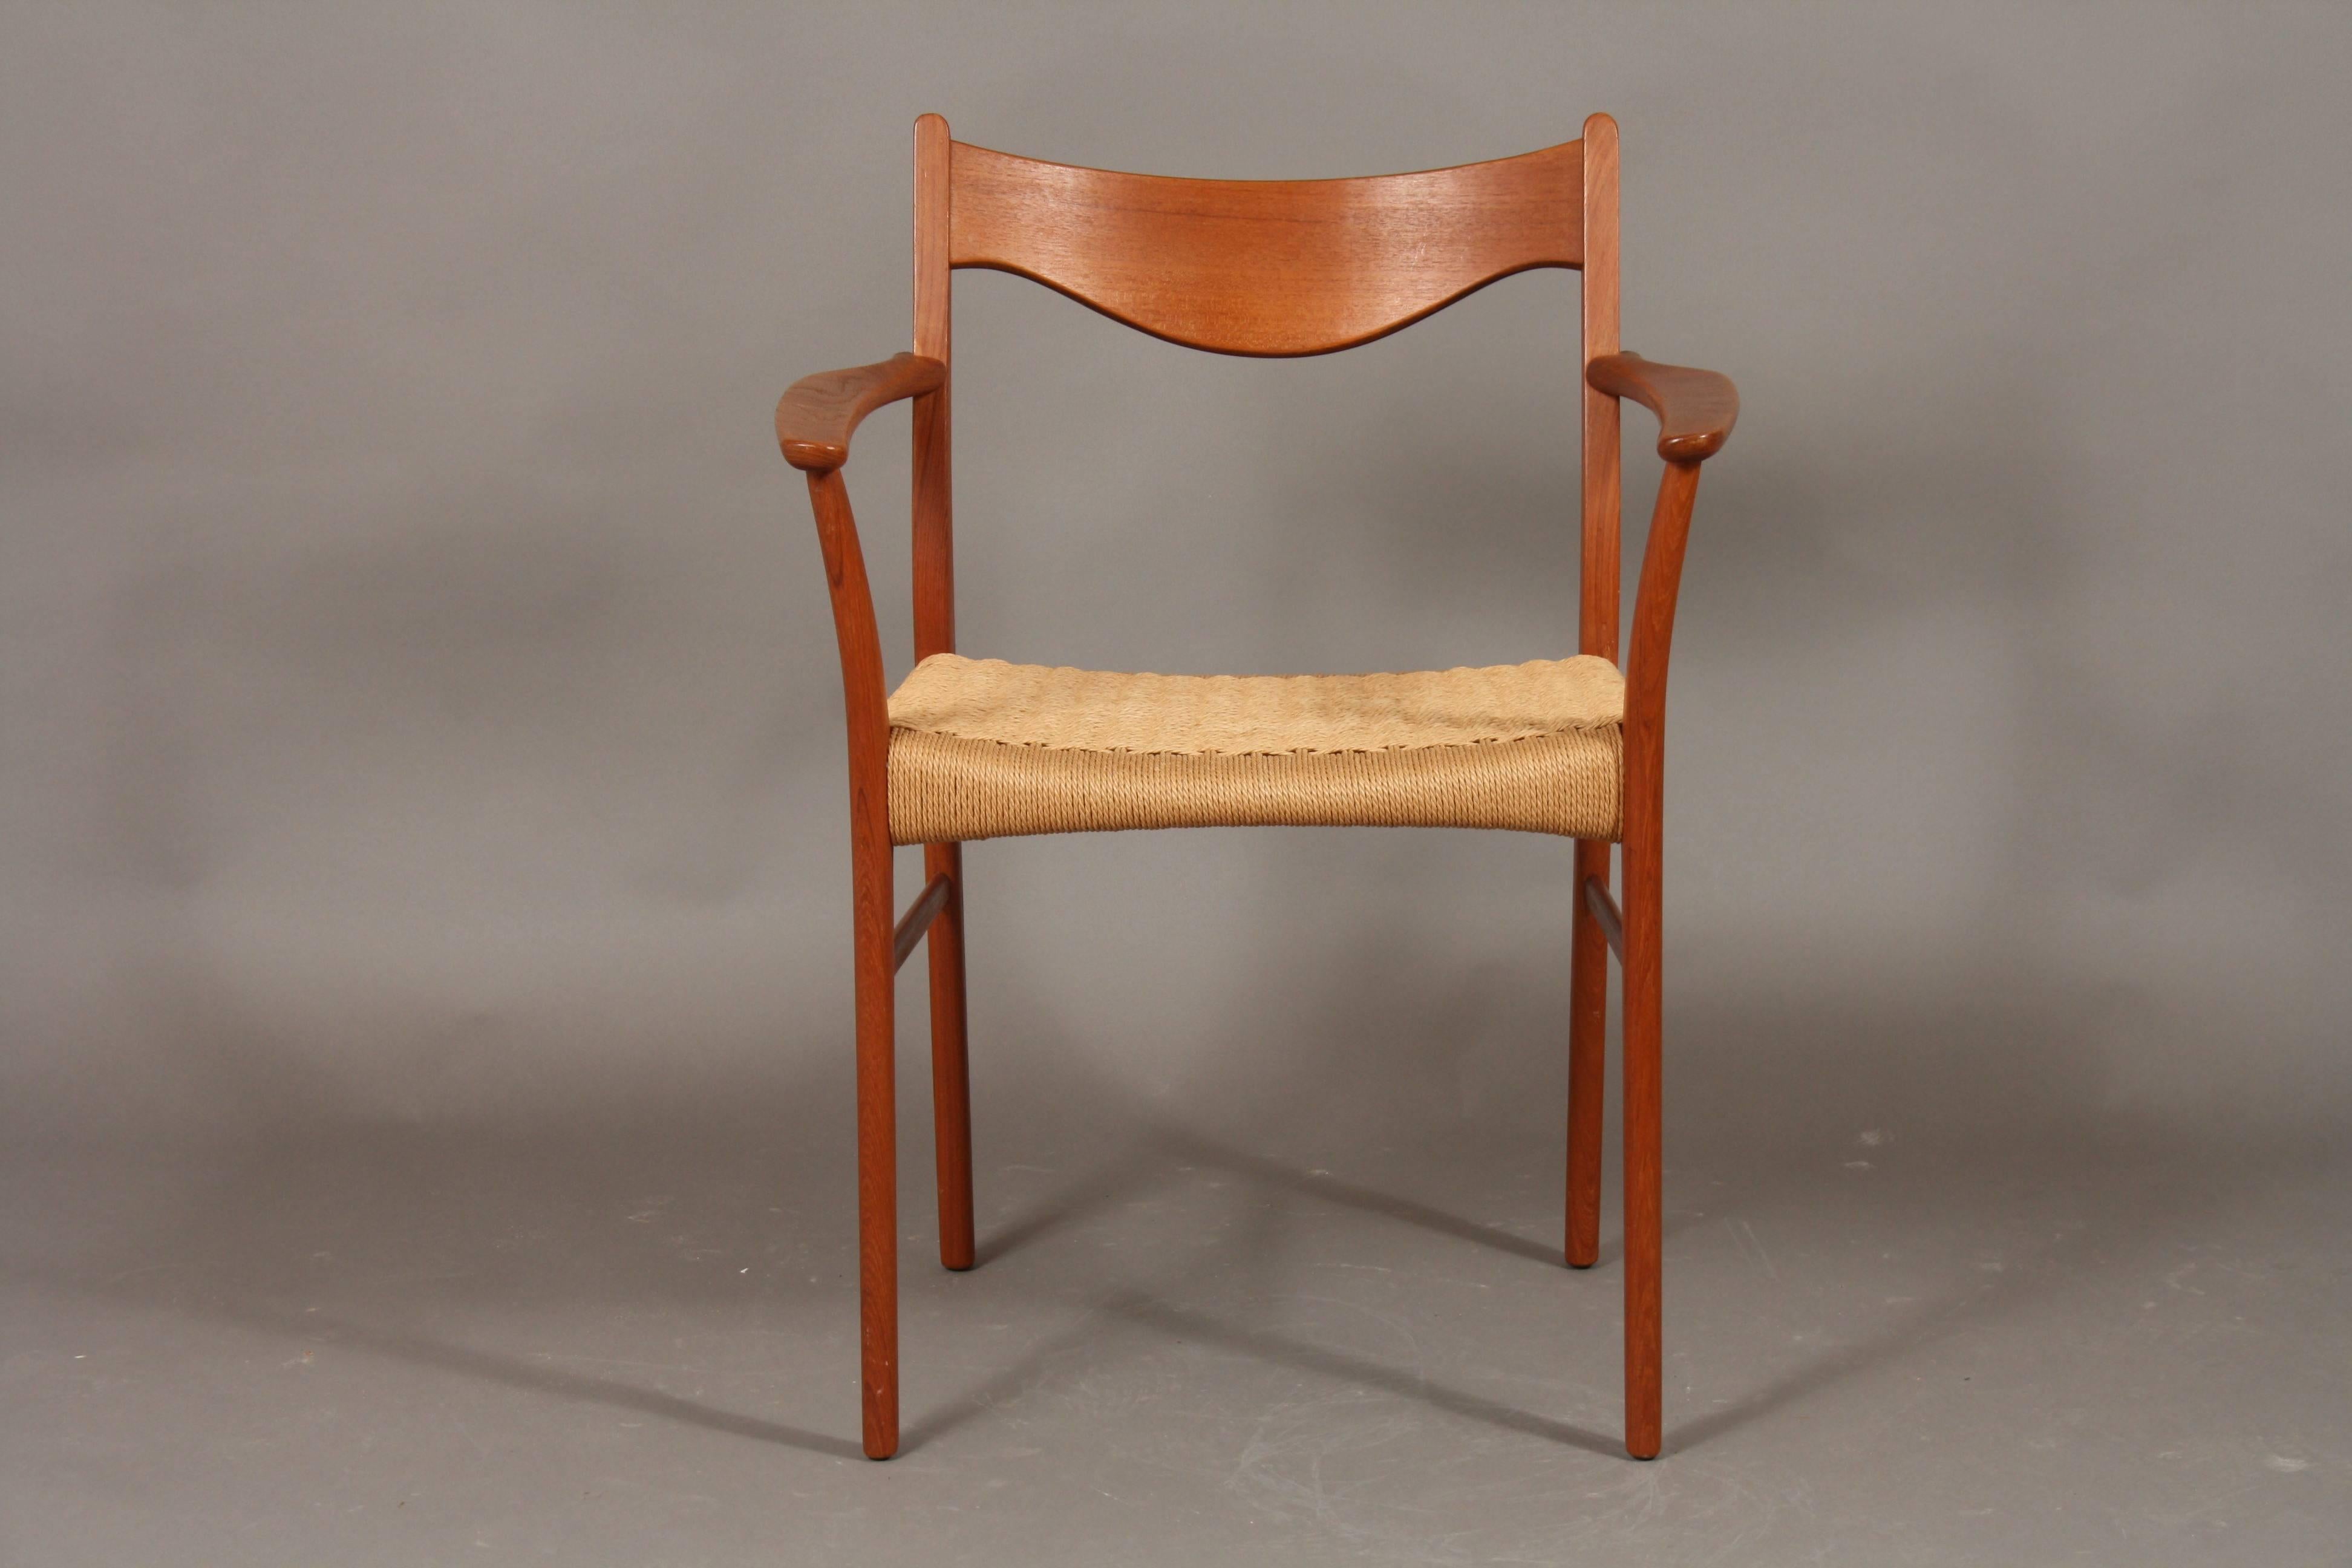 Set of two armchairs by the Danish designer Arne Wahl Iversen - model GS600. The frame is made of teak and the seat is woven seagrass and in very good condition. Beautiful Danish design from the Mid-Century. They are produced at Glyngøre Stolefabrik.